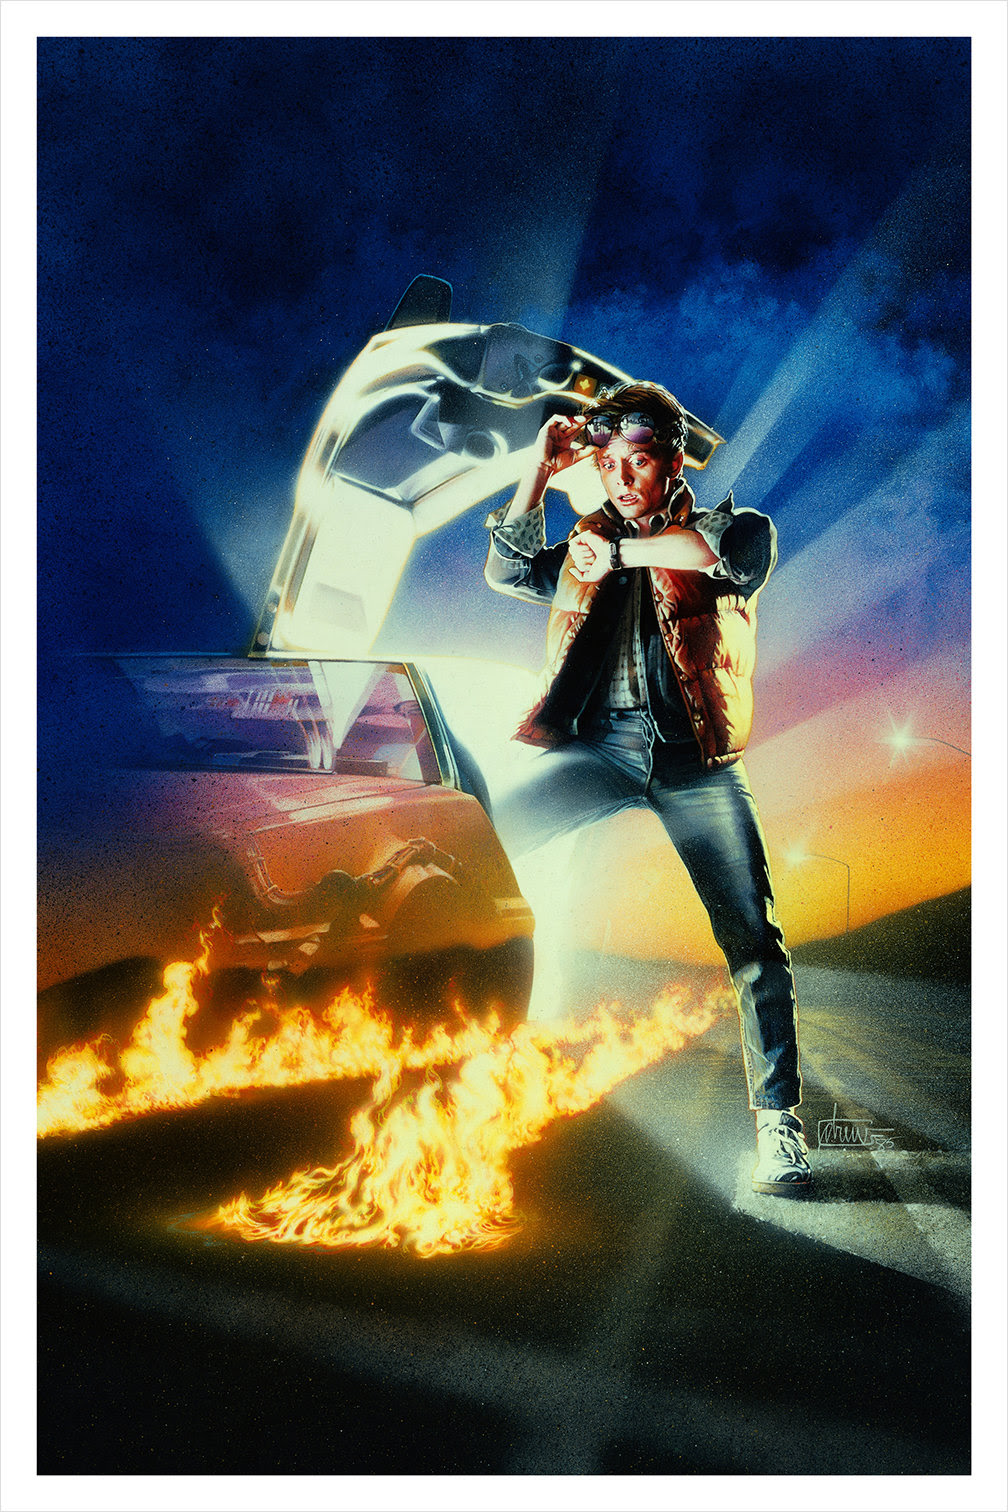 Drew Struzan’s Iconic Back To The Future Poster Just Got An Upgrade